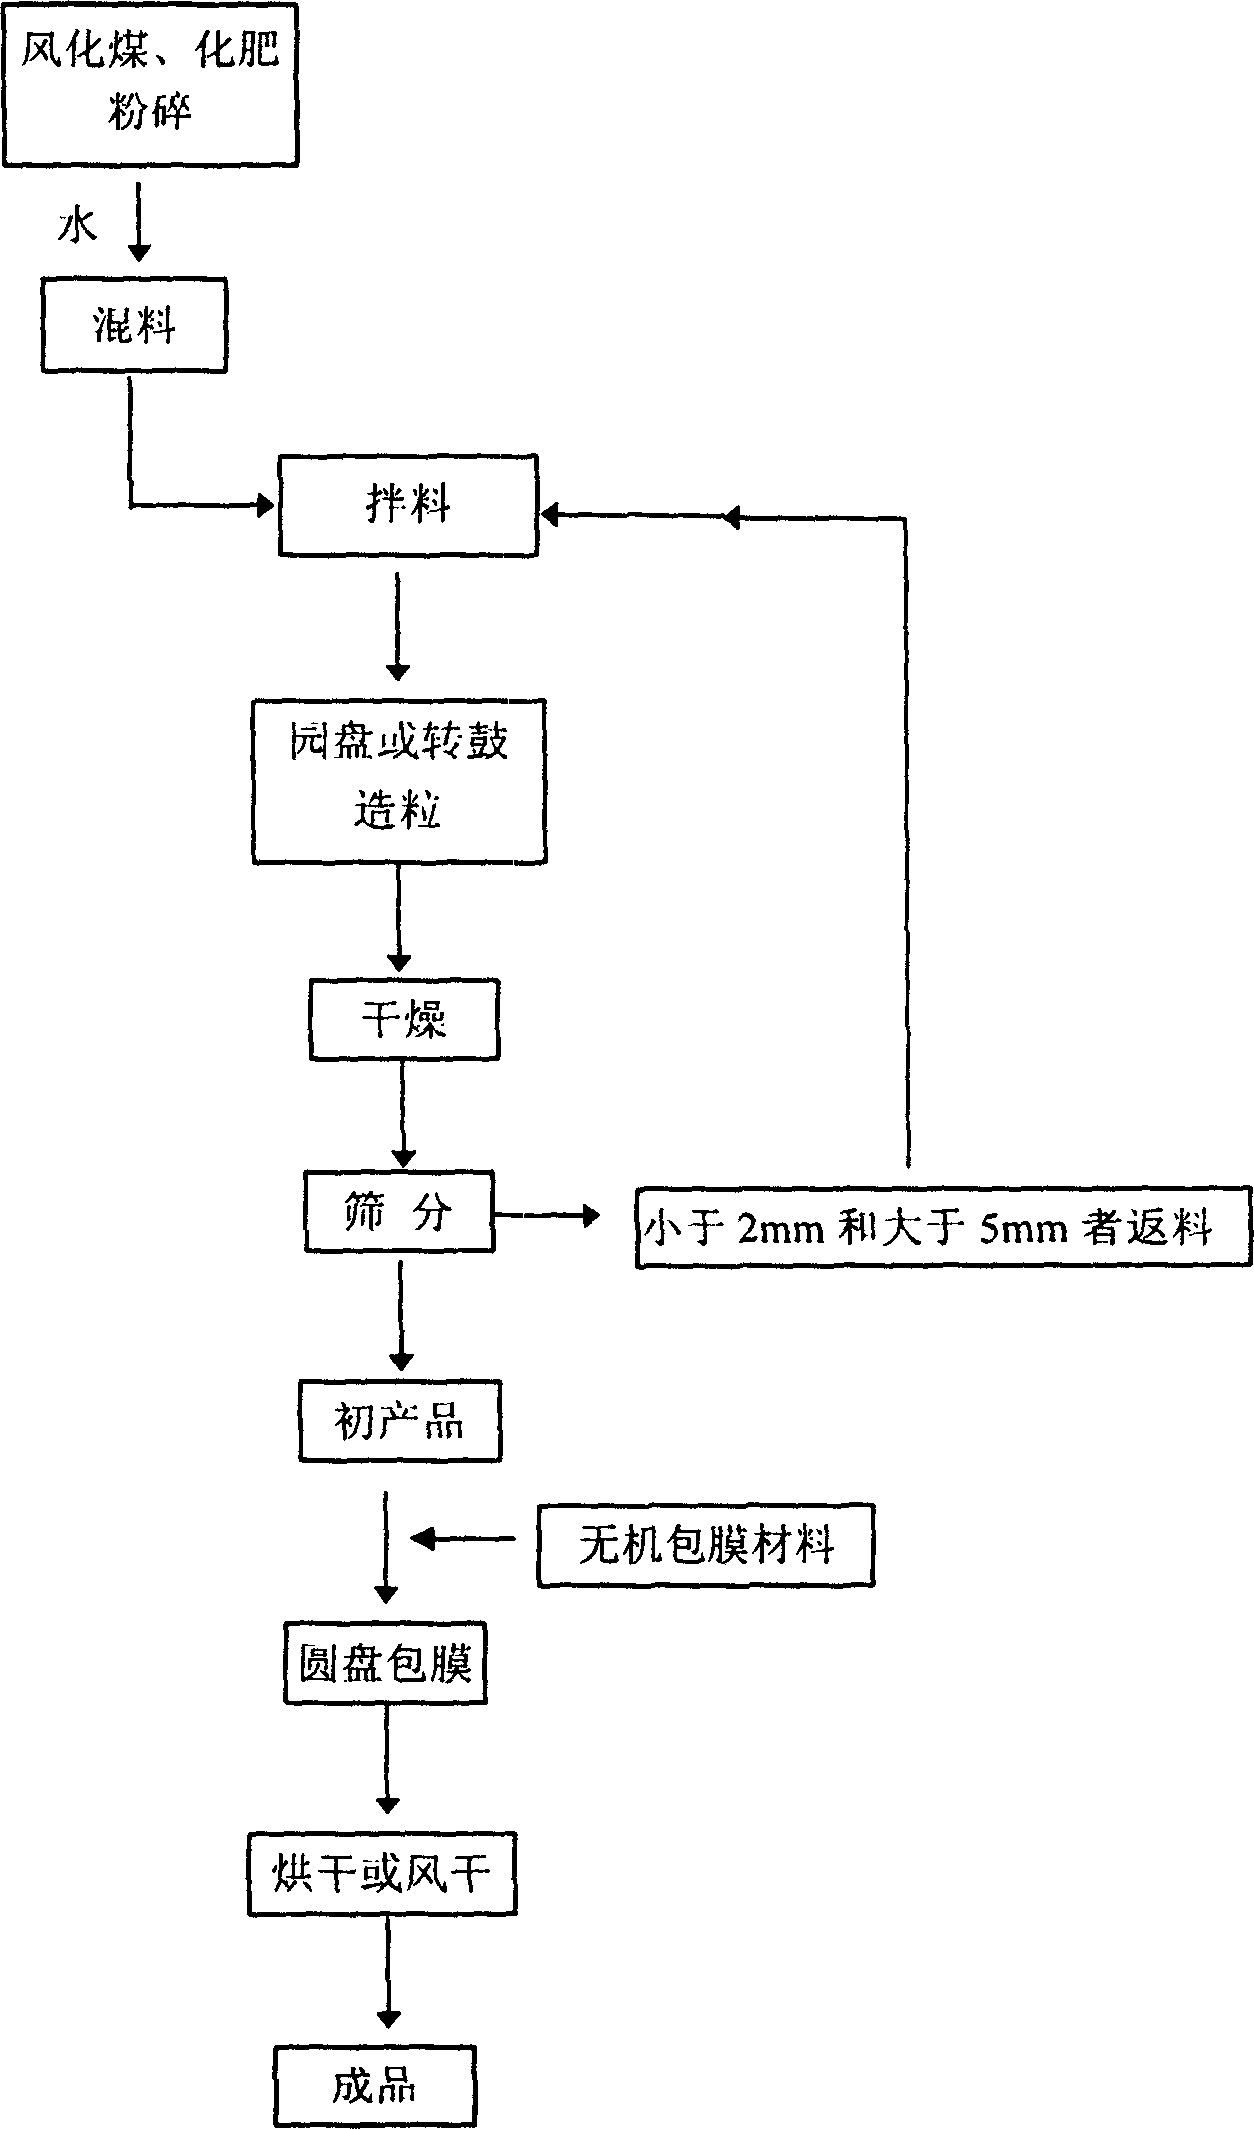 Double-control composite slow-release fertilizer and method for preparing same